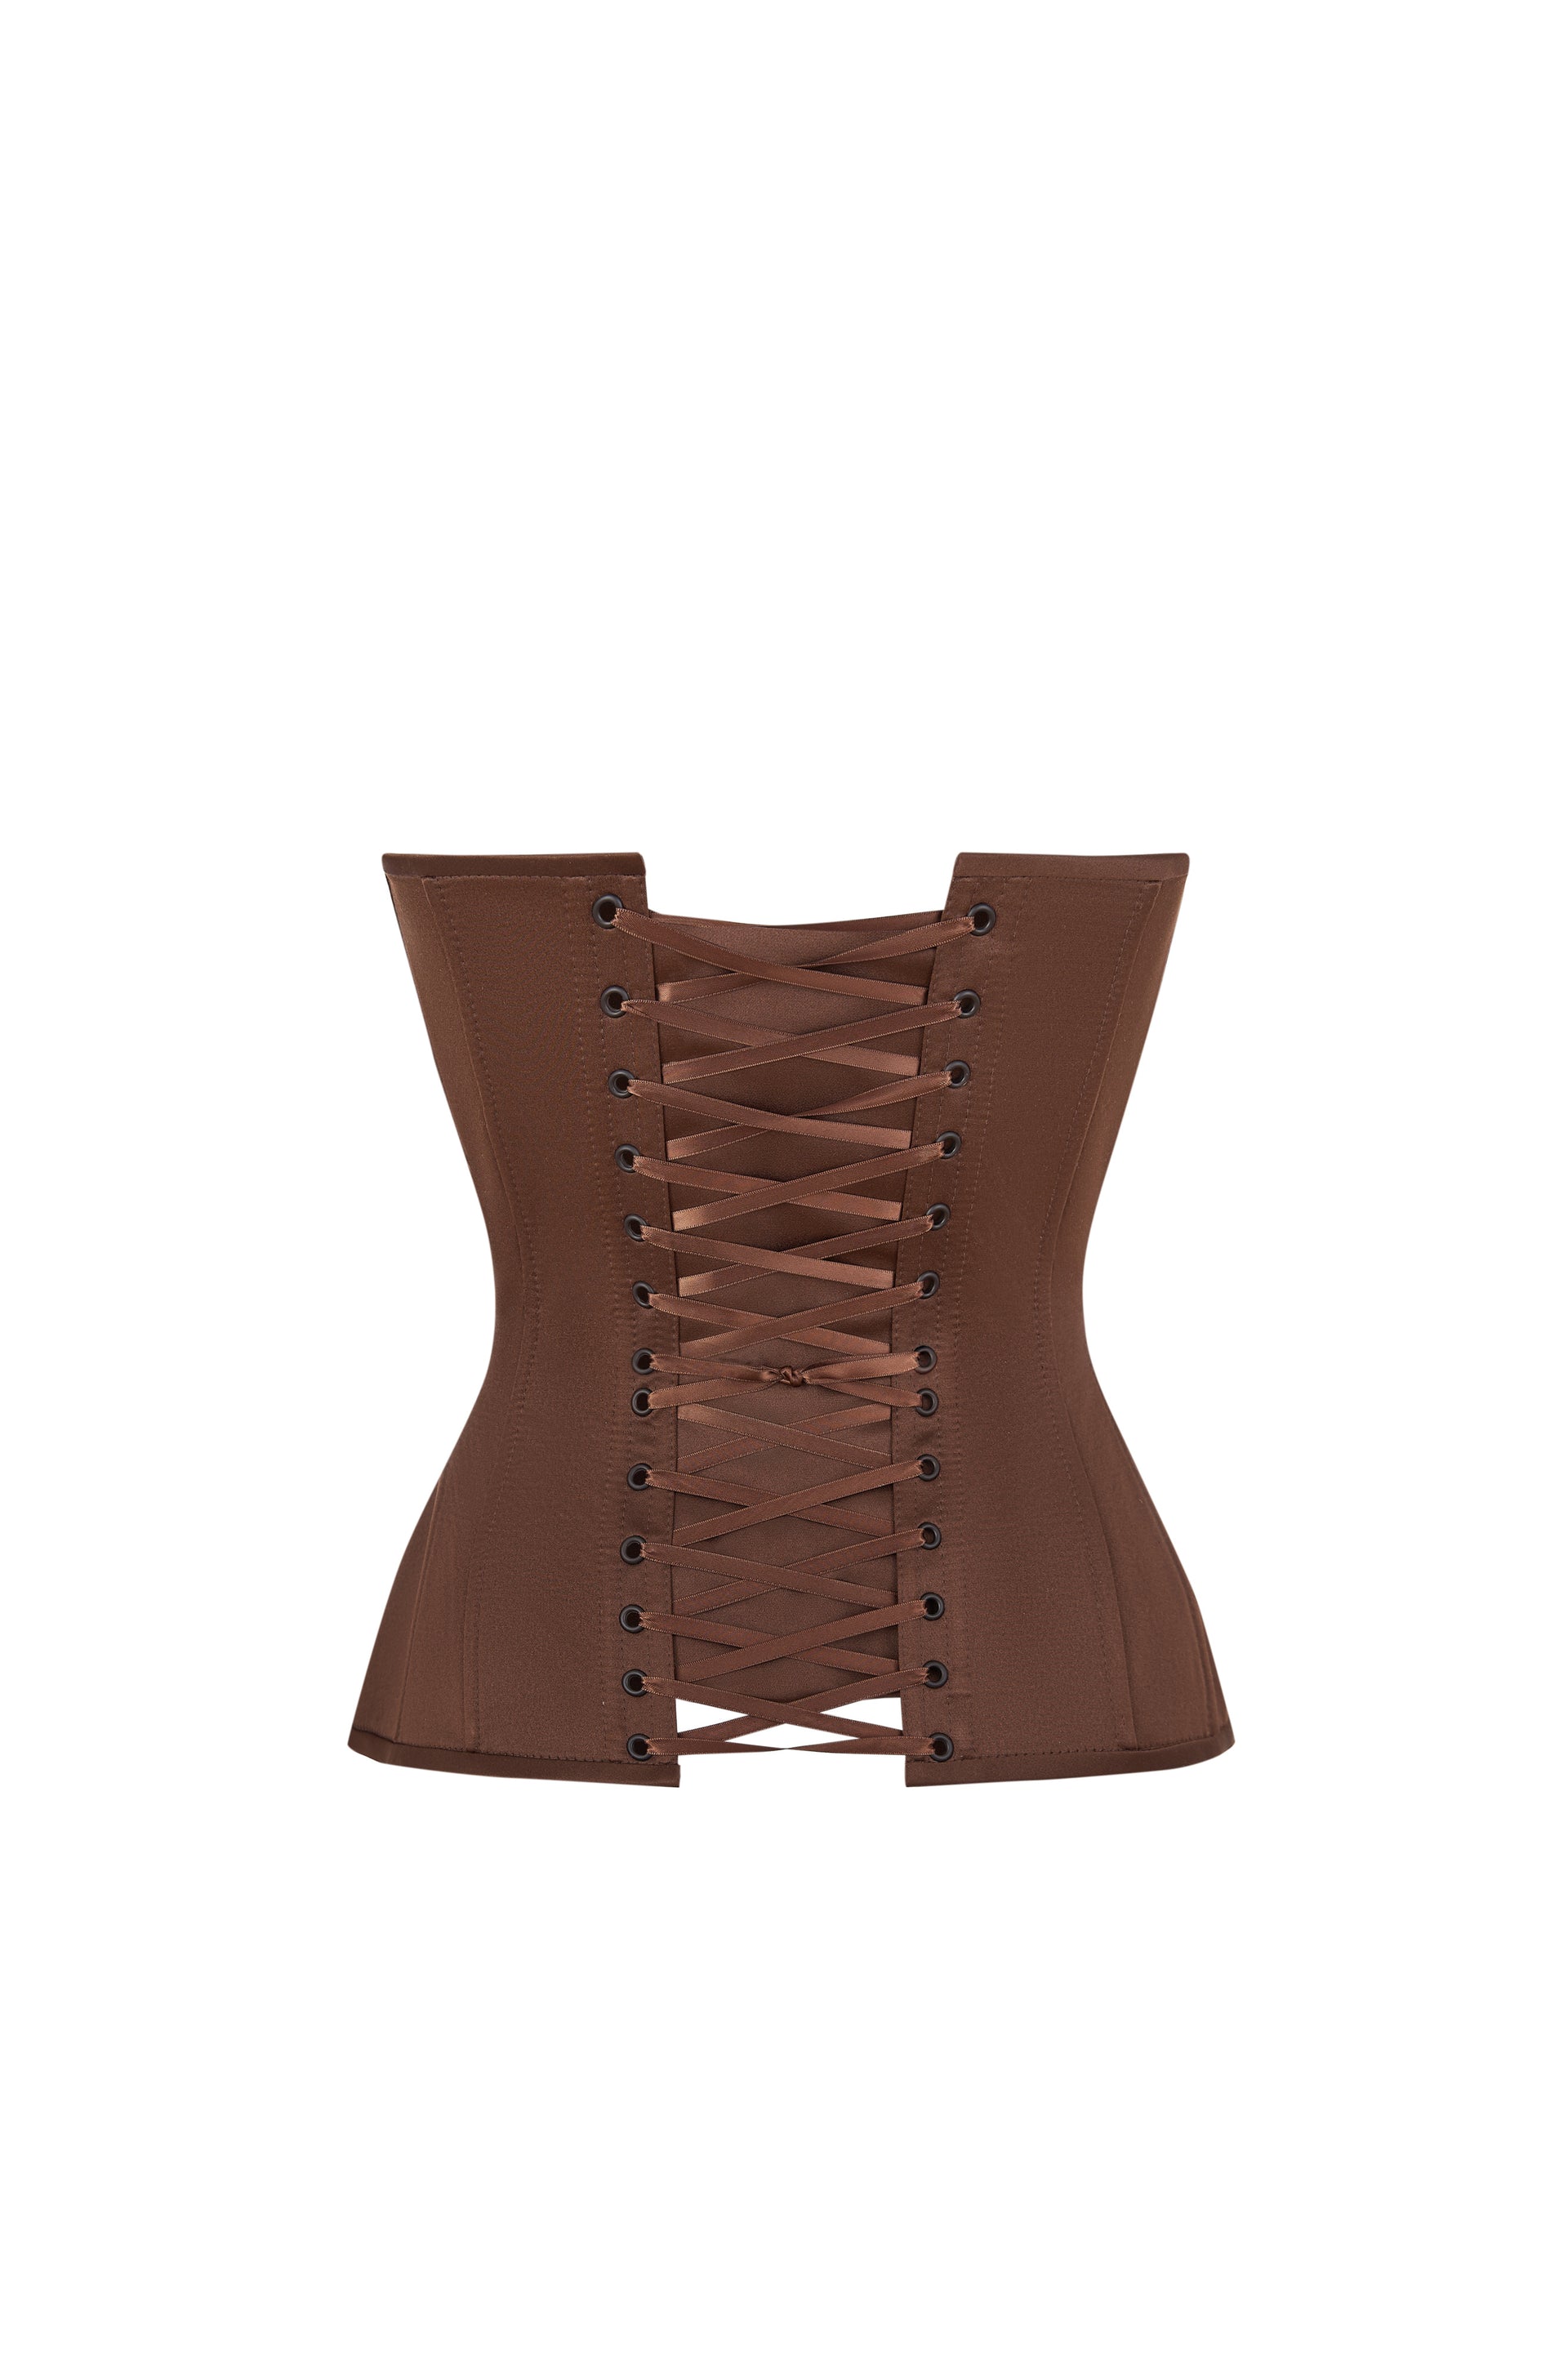 Brown satin corset with cups - STATNAIA